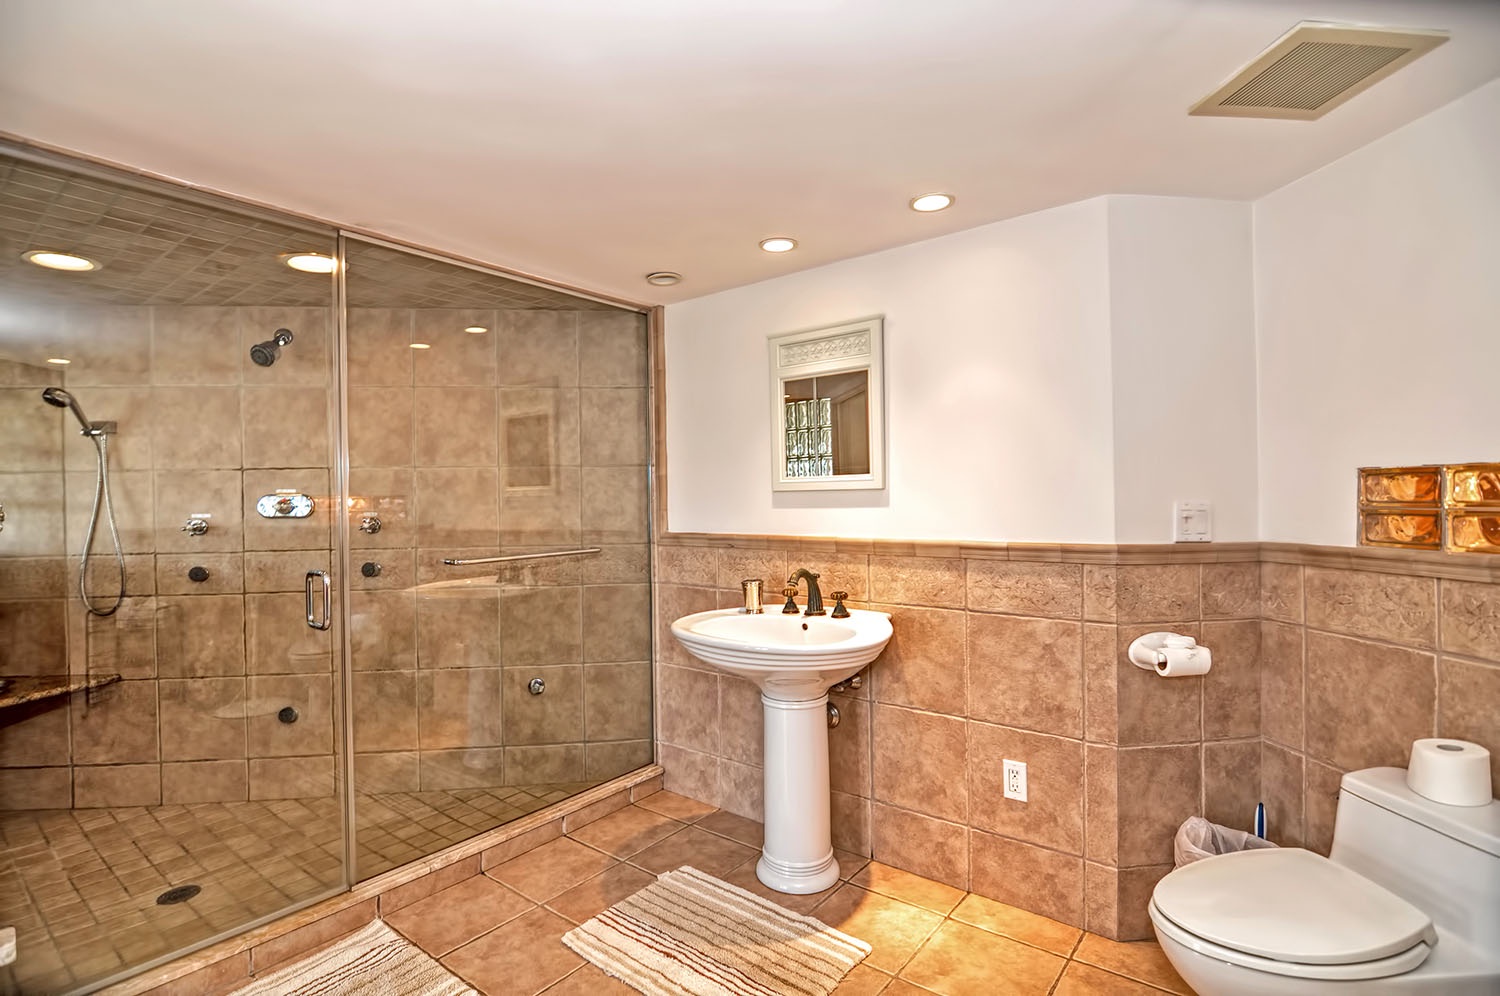 The enormous bathroom contains a very large walk-in shower.